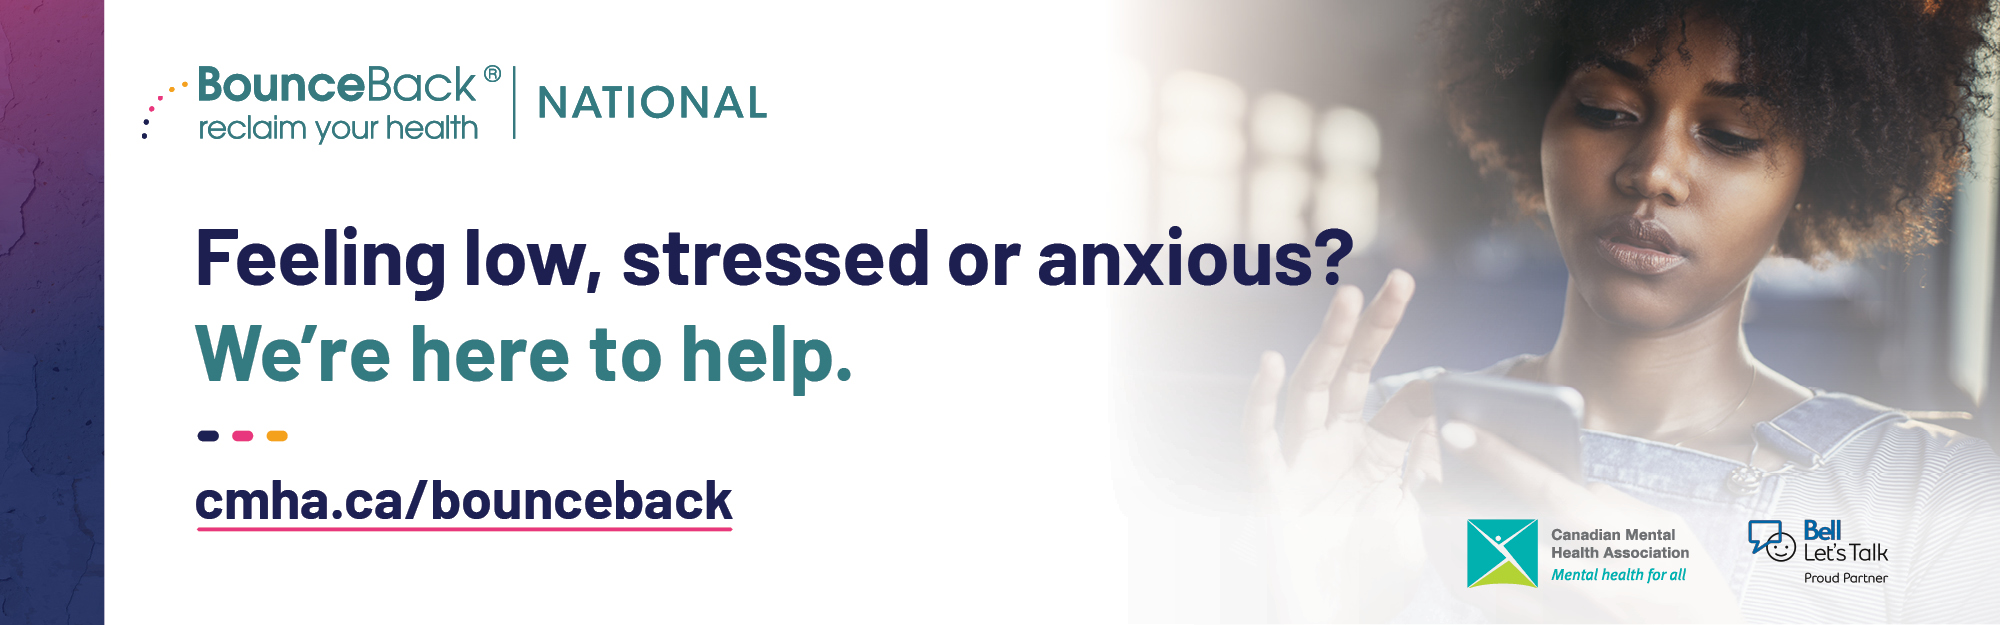 Feeling low, stressed or anxious? We're here to help. A young woman holds her smartphone.